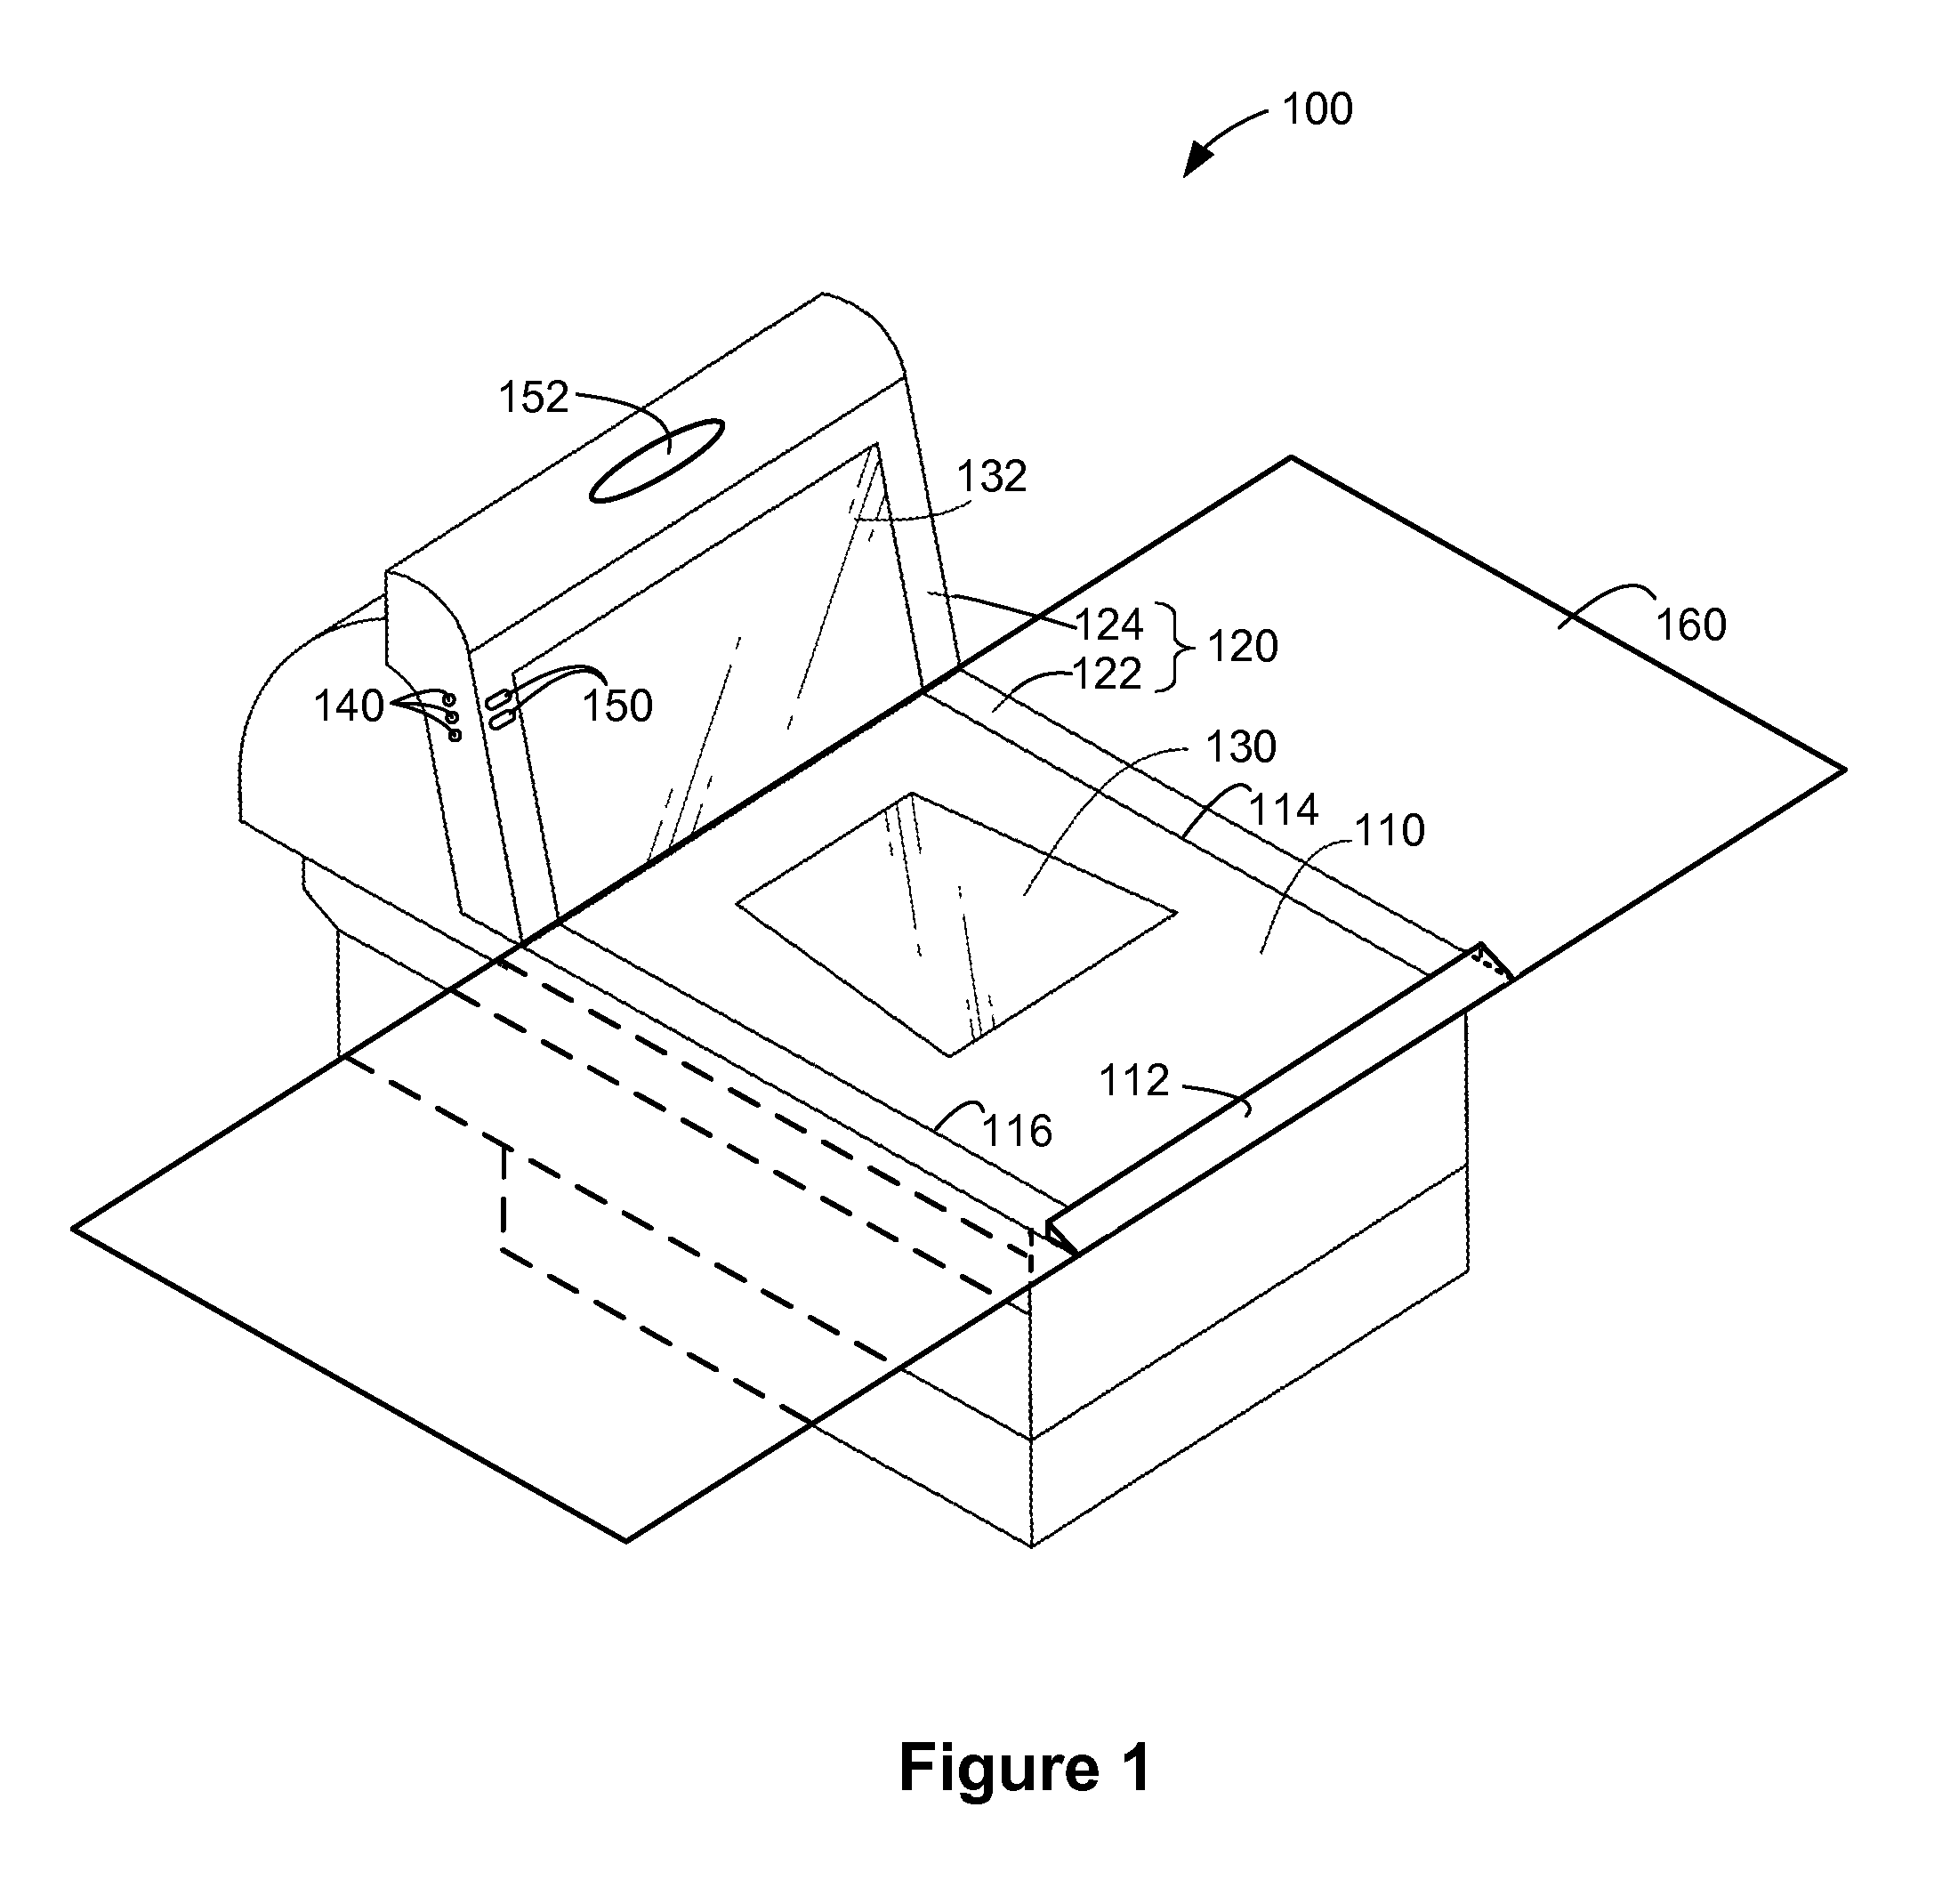 Systems and methods for reducing weighing errors associated with partially off-scale items